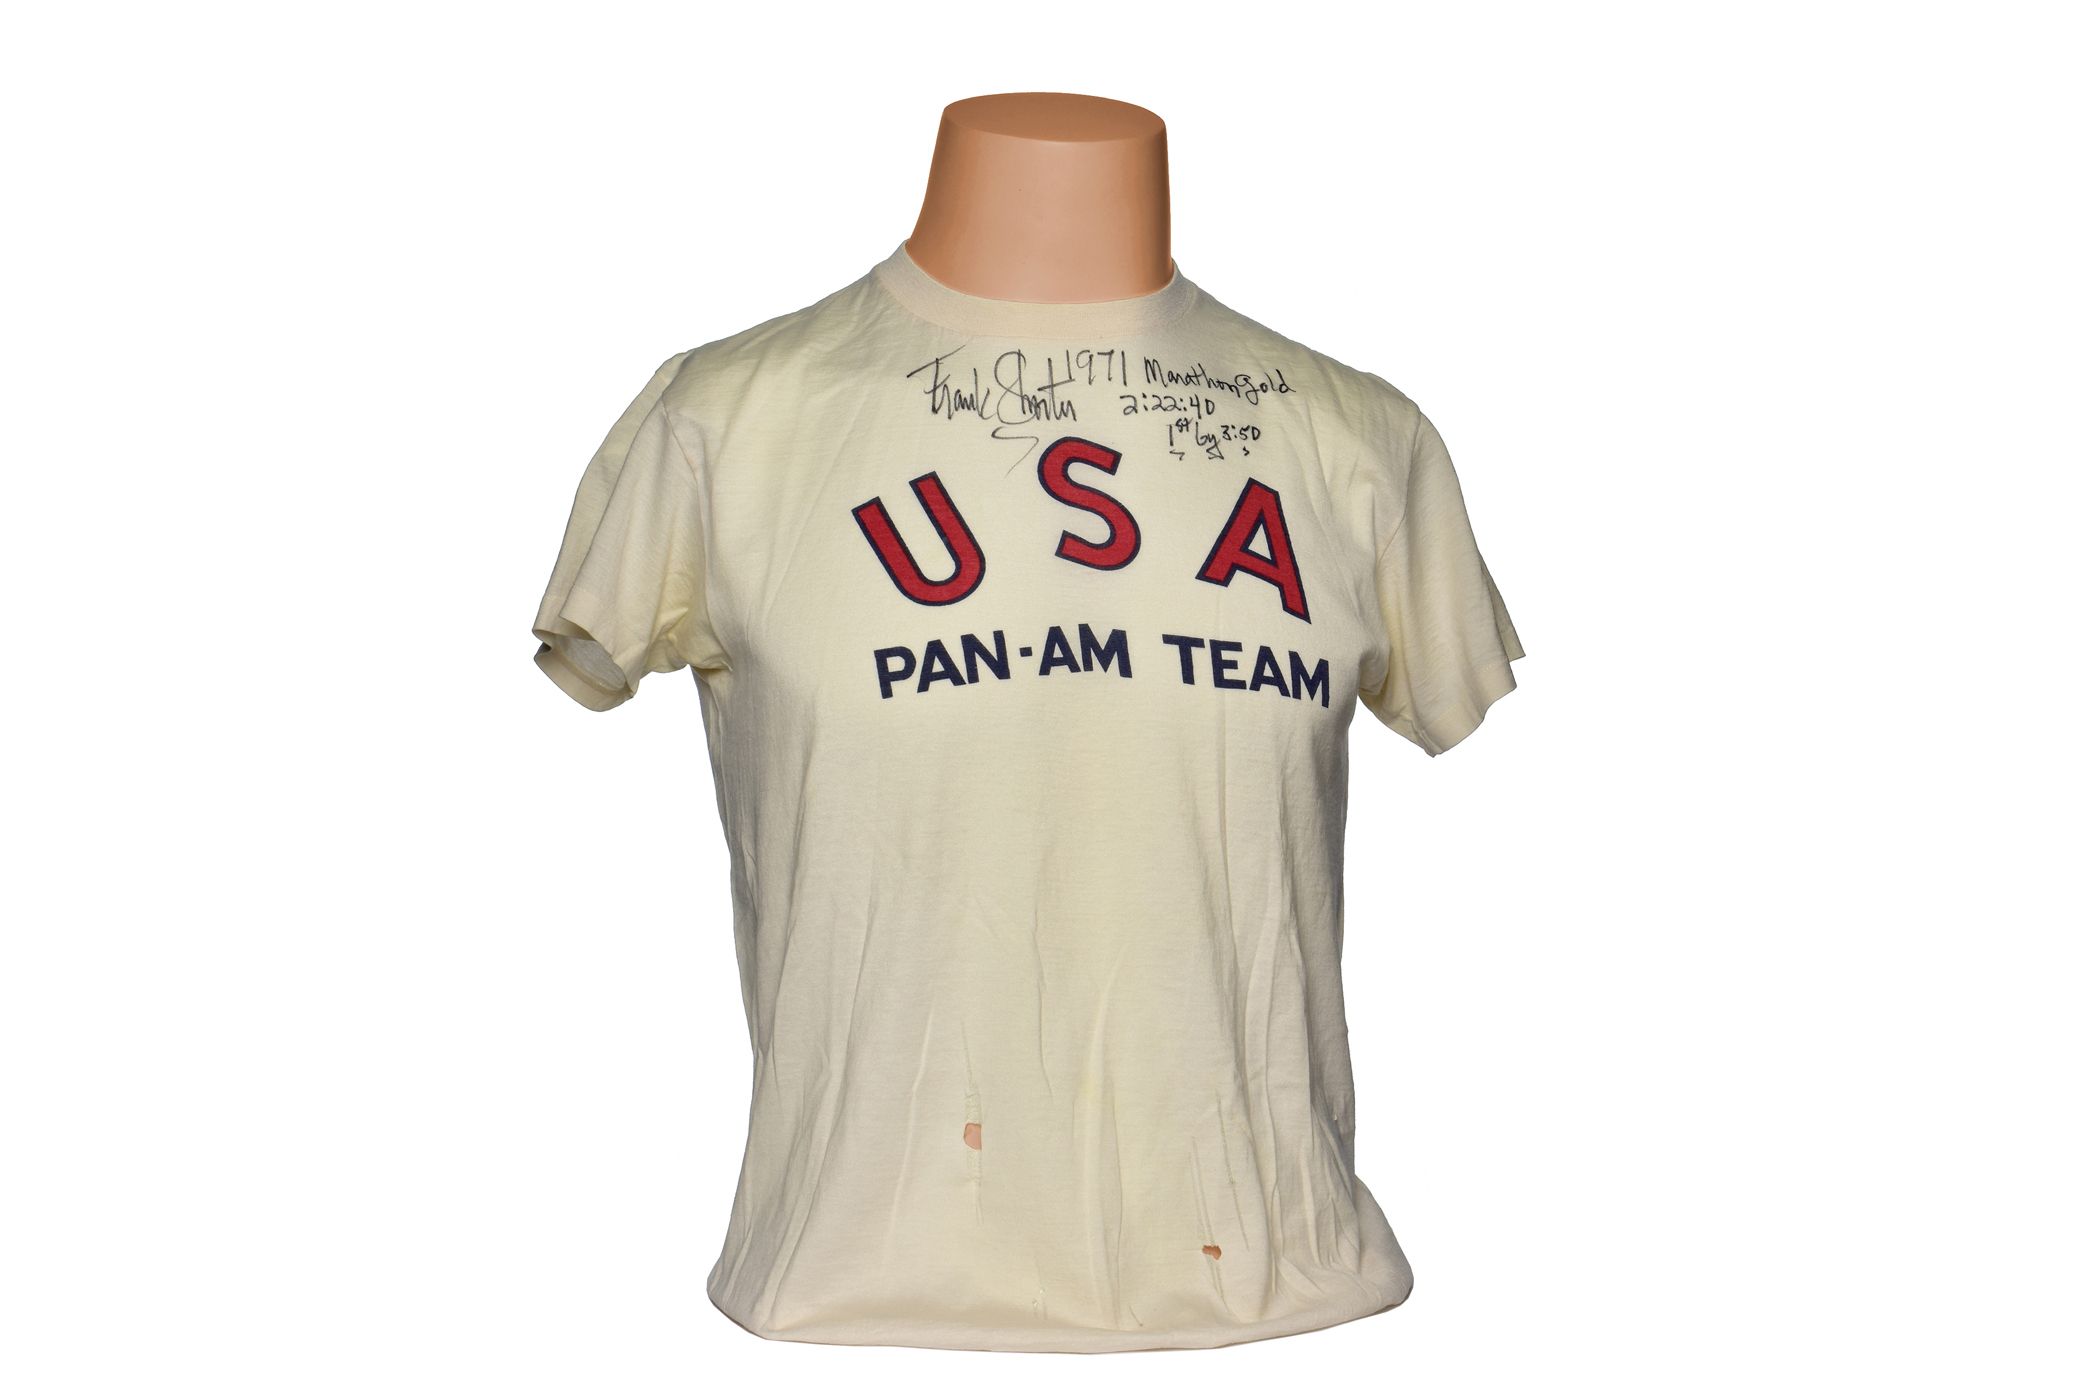 Frank Shorter's signed t-shirt from the 1971 Pan American Games